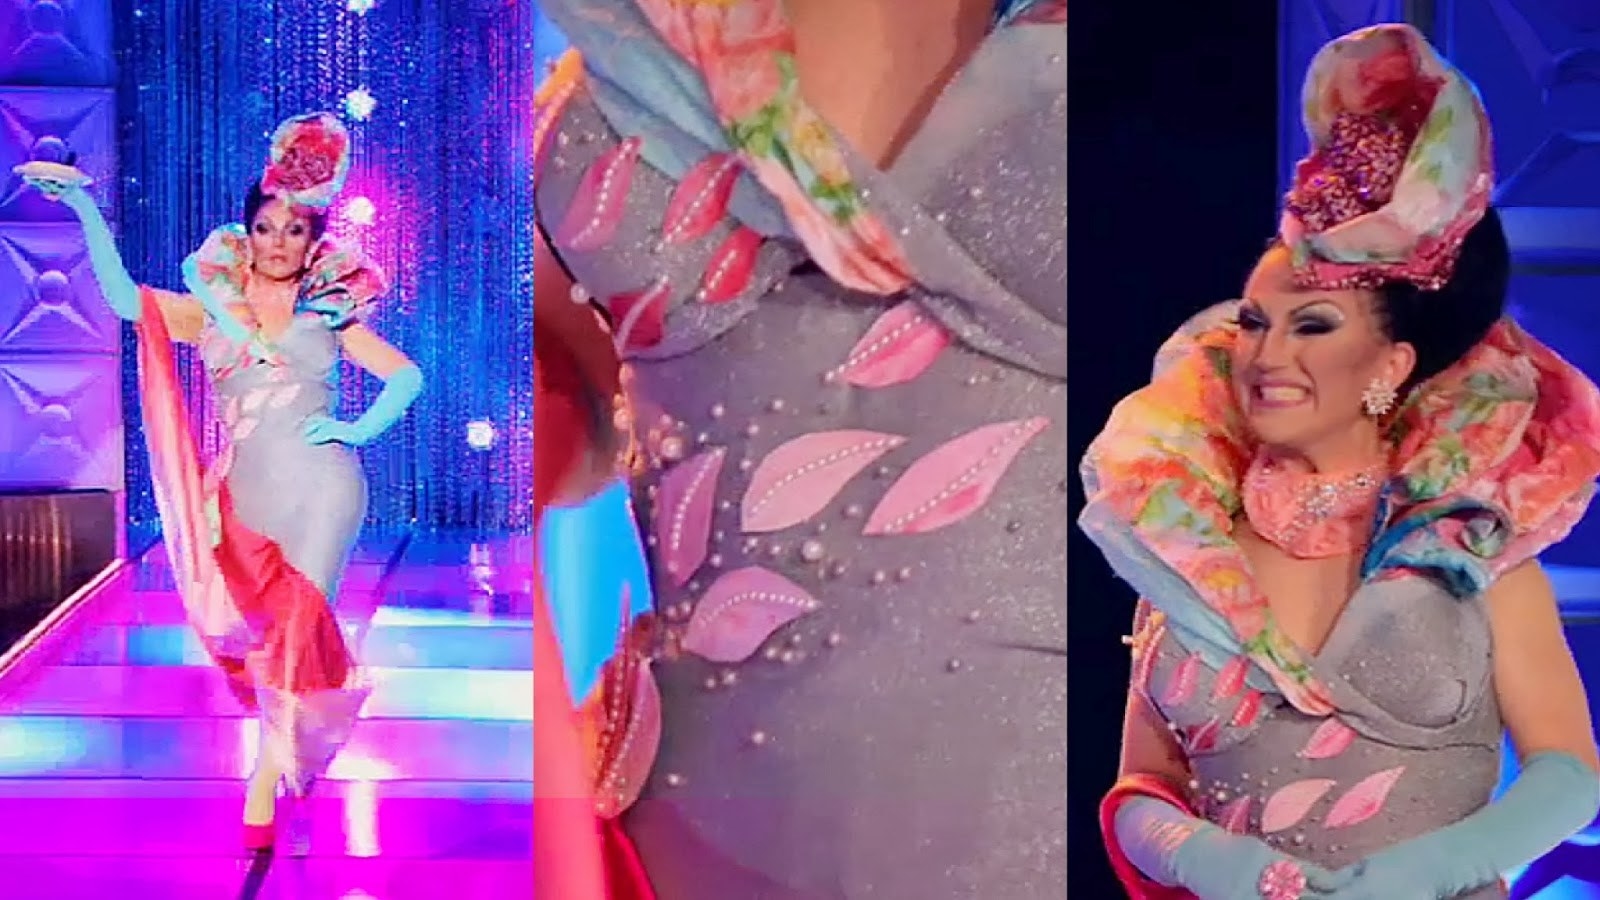 Drag queen BenDeLaCreme wearing a fitted gown made from Golden Girls inspired scraps